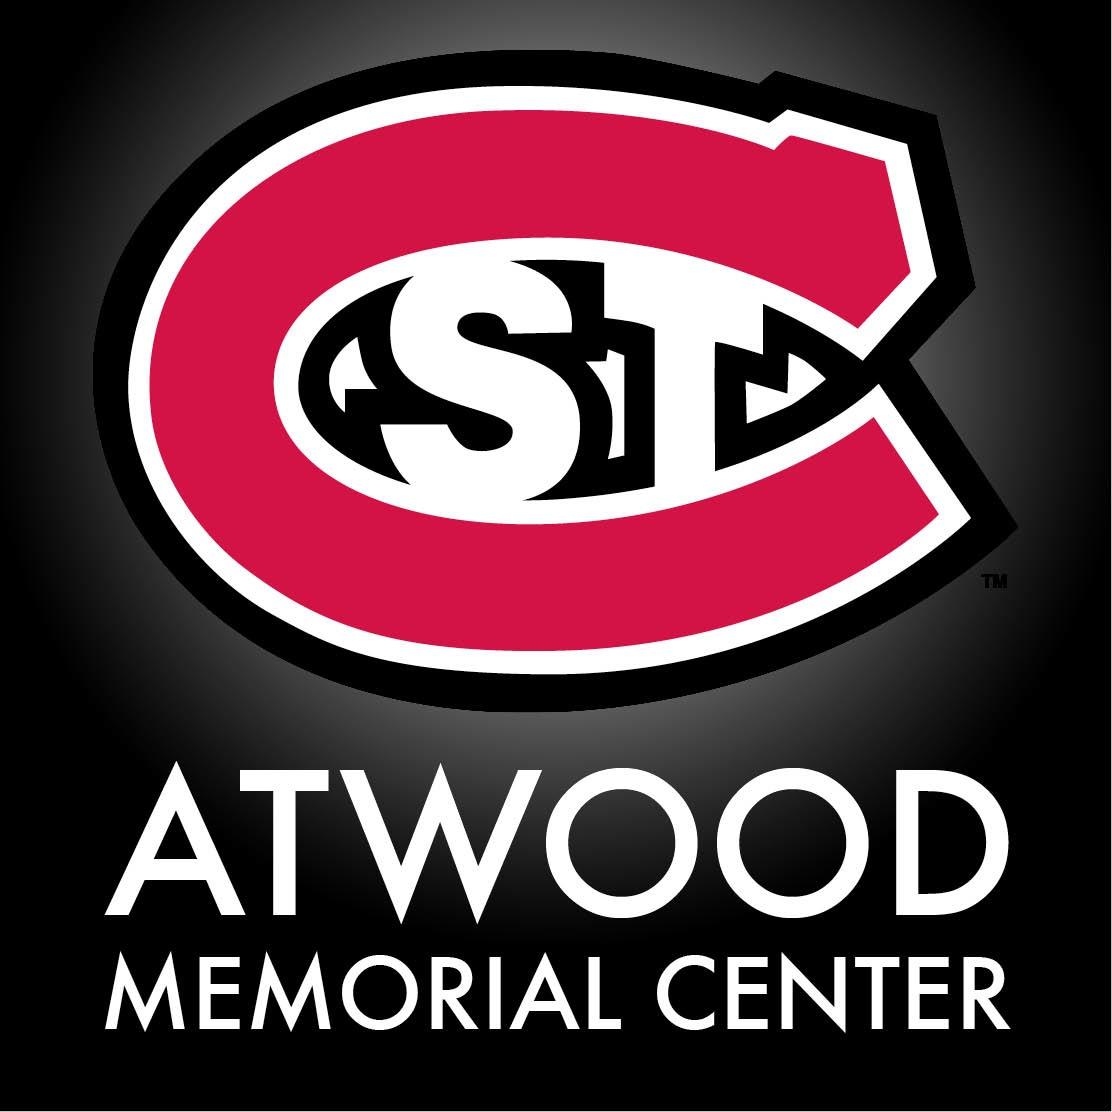 Atwood Memorial Center Student Union serves as a unifying force honoring each individual, valuing diversity and fostering a sense of community.